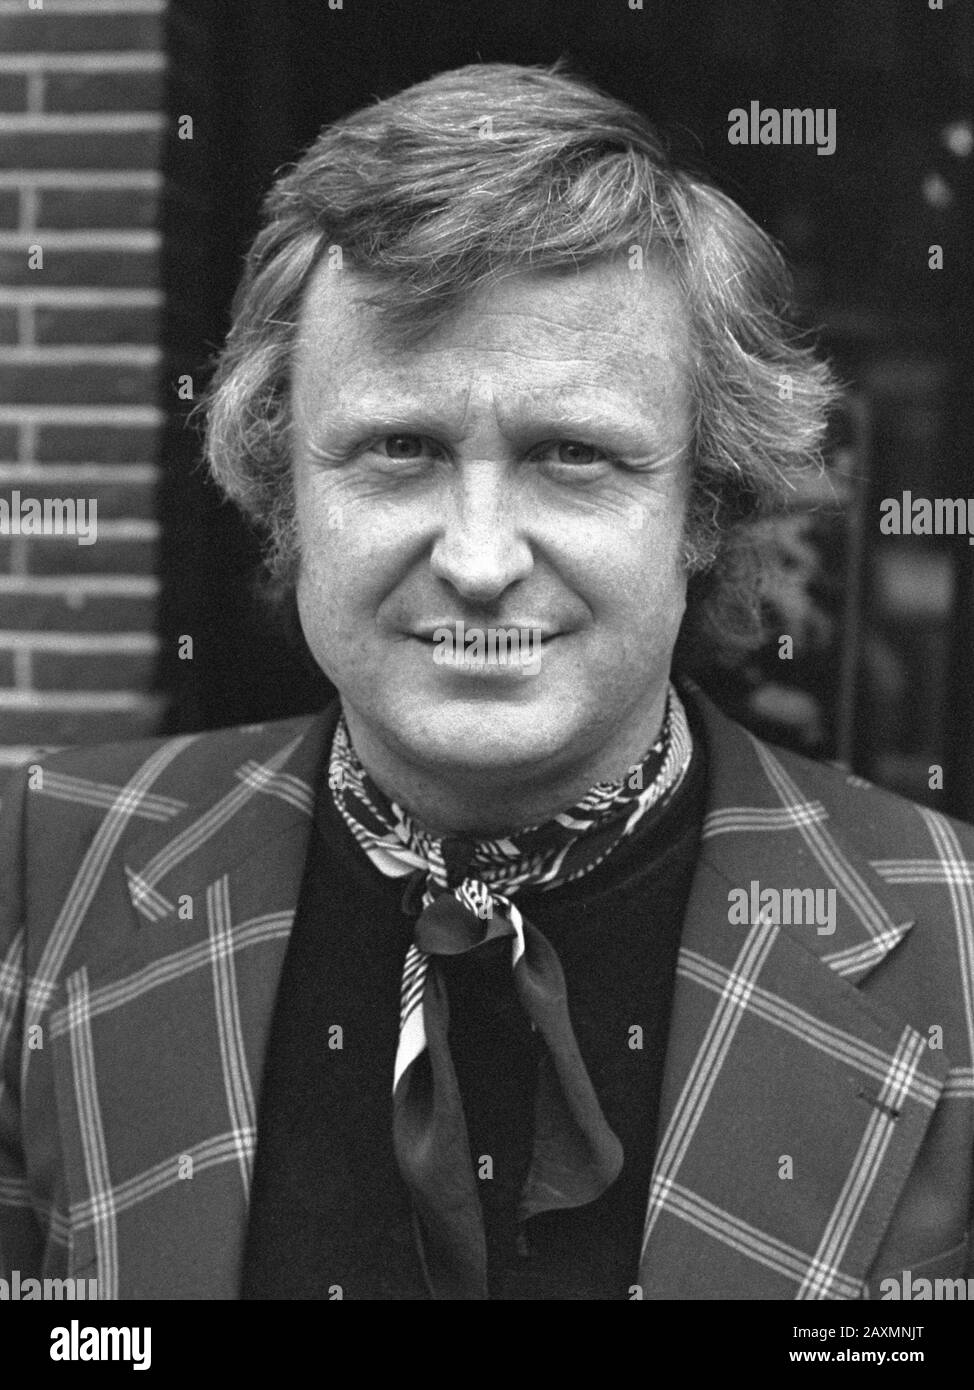 John Boorman film Zardoz during the press conference on August 26, 1974 Stock Photo